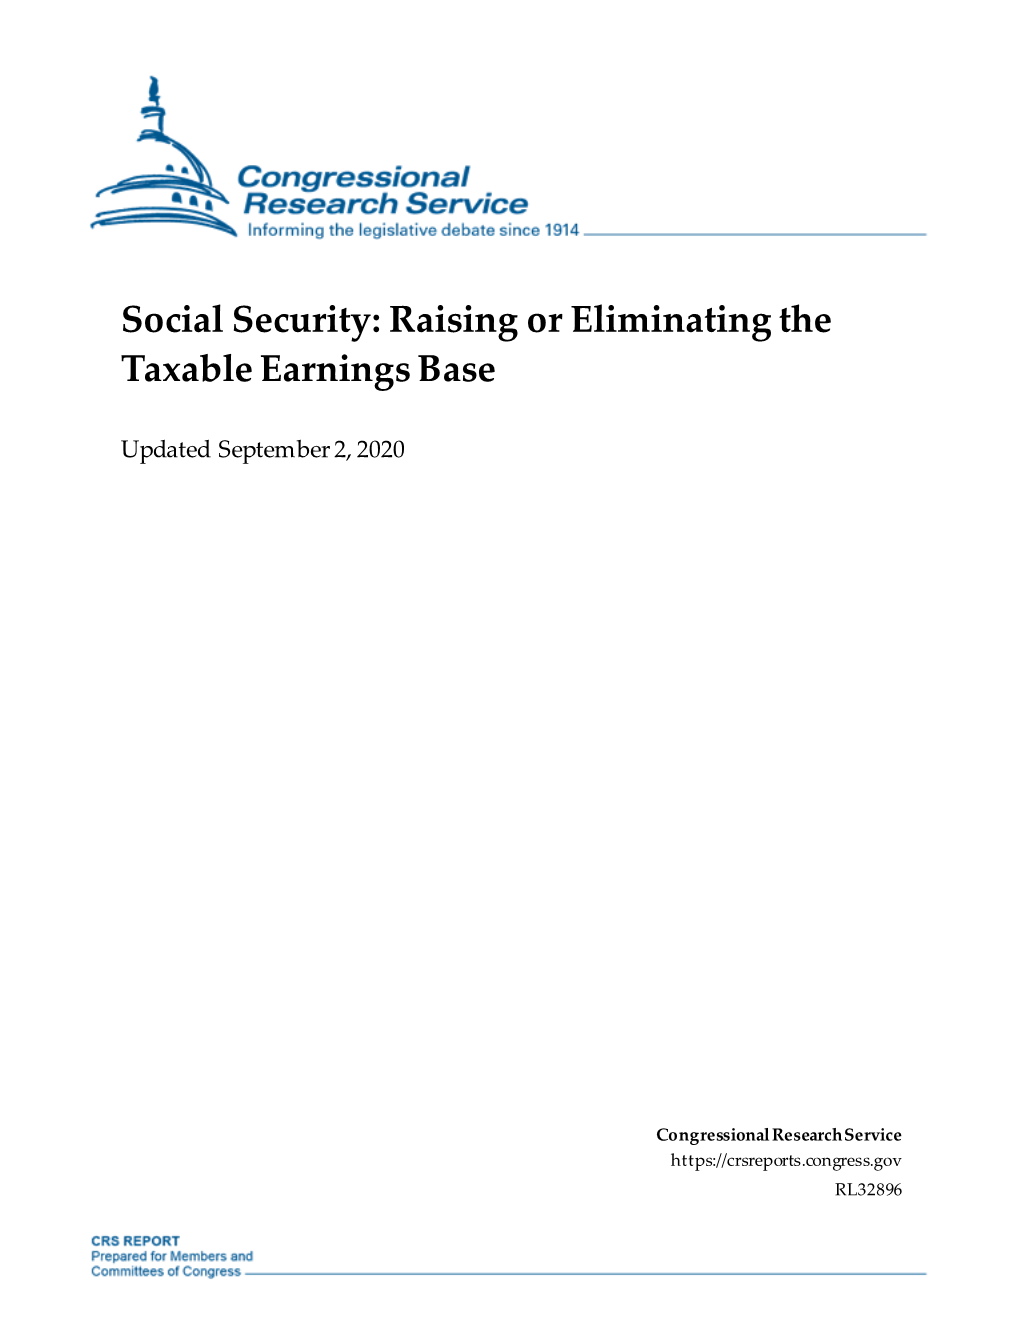 Social Security: Raising Or Eliminating the Taxable Earnings Base